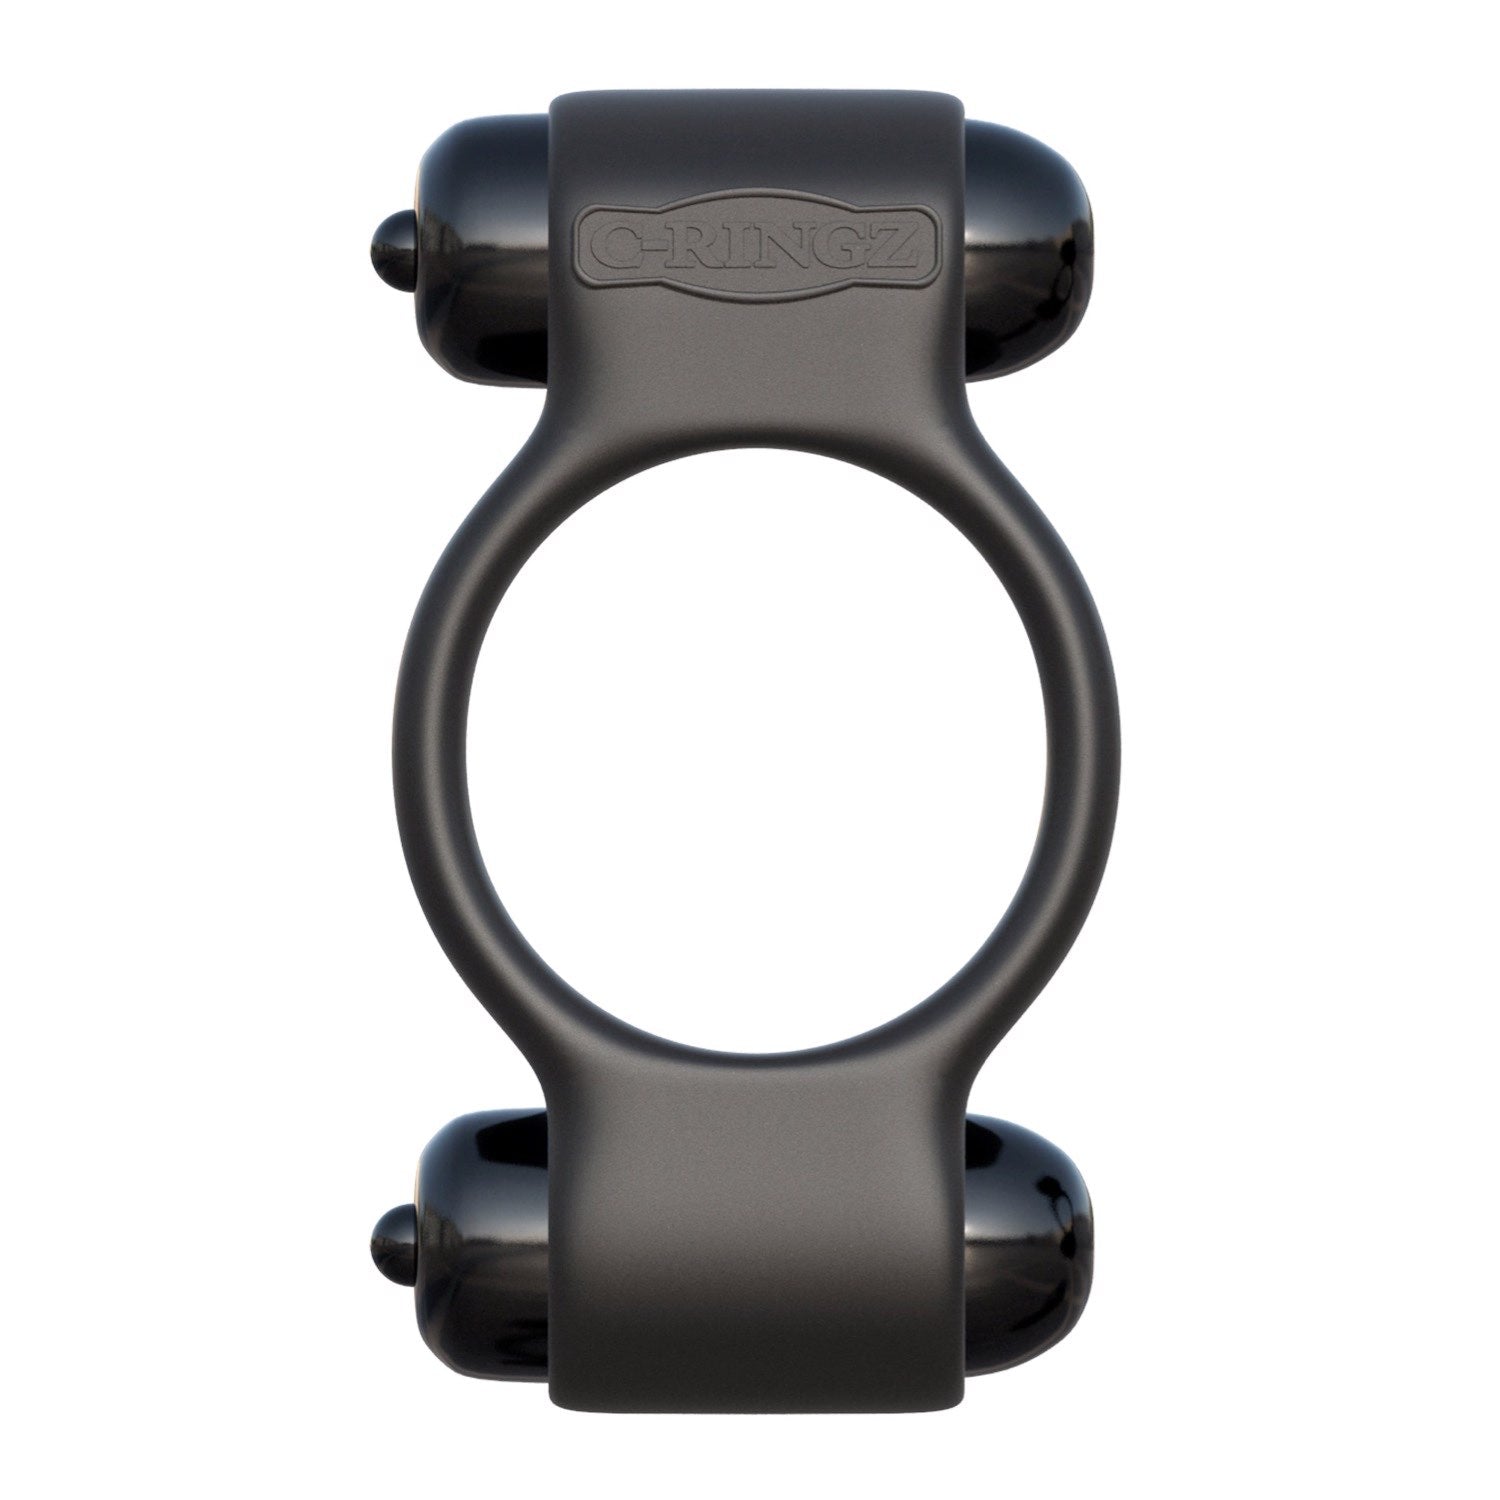 Fantasy C-Ringz Fantasy C-ringz Magic Touch Couples Ring - Black Dual Vibrating Cock Ring by Pipedream